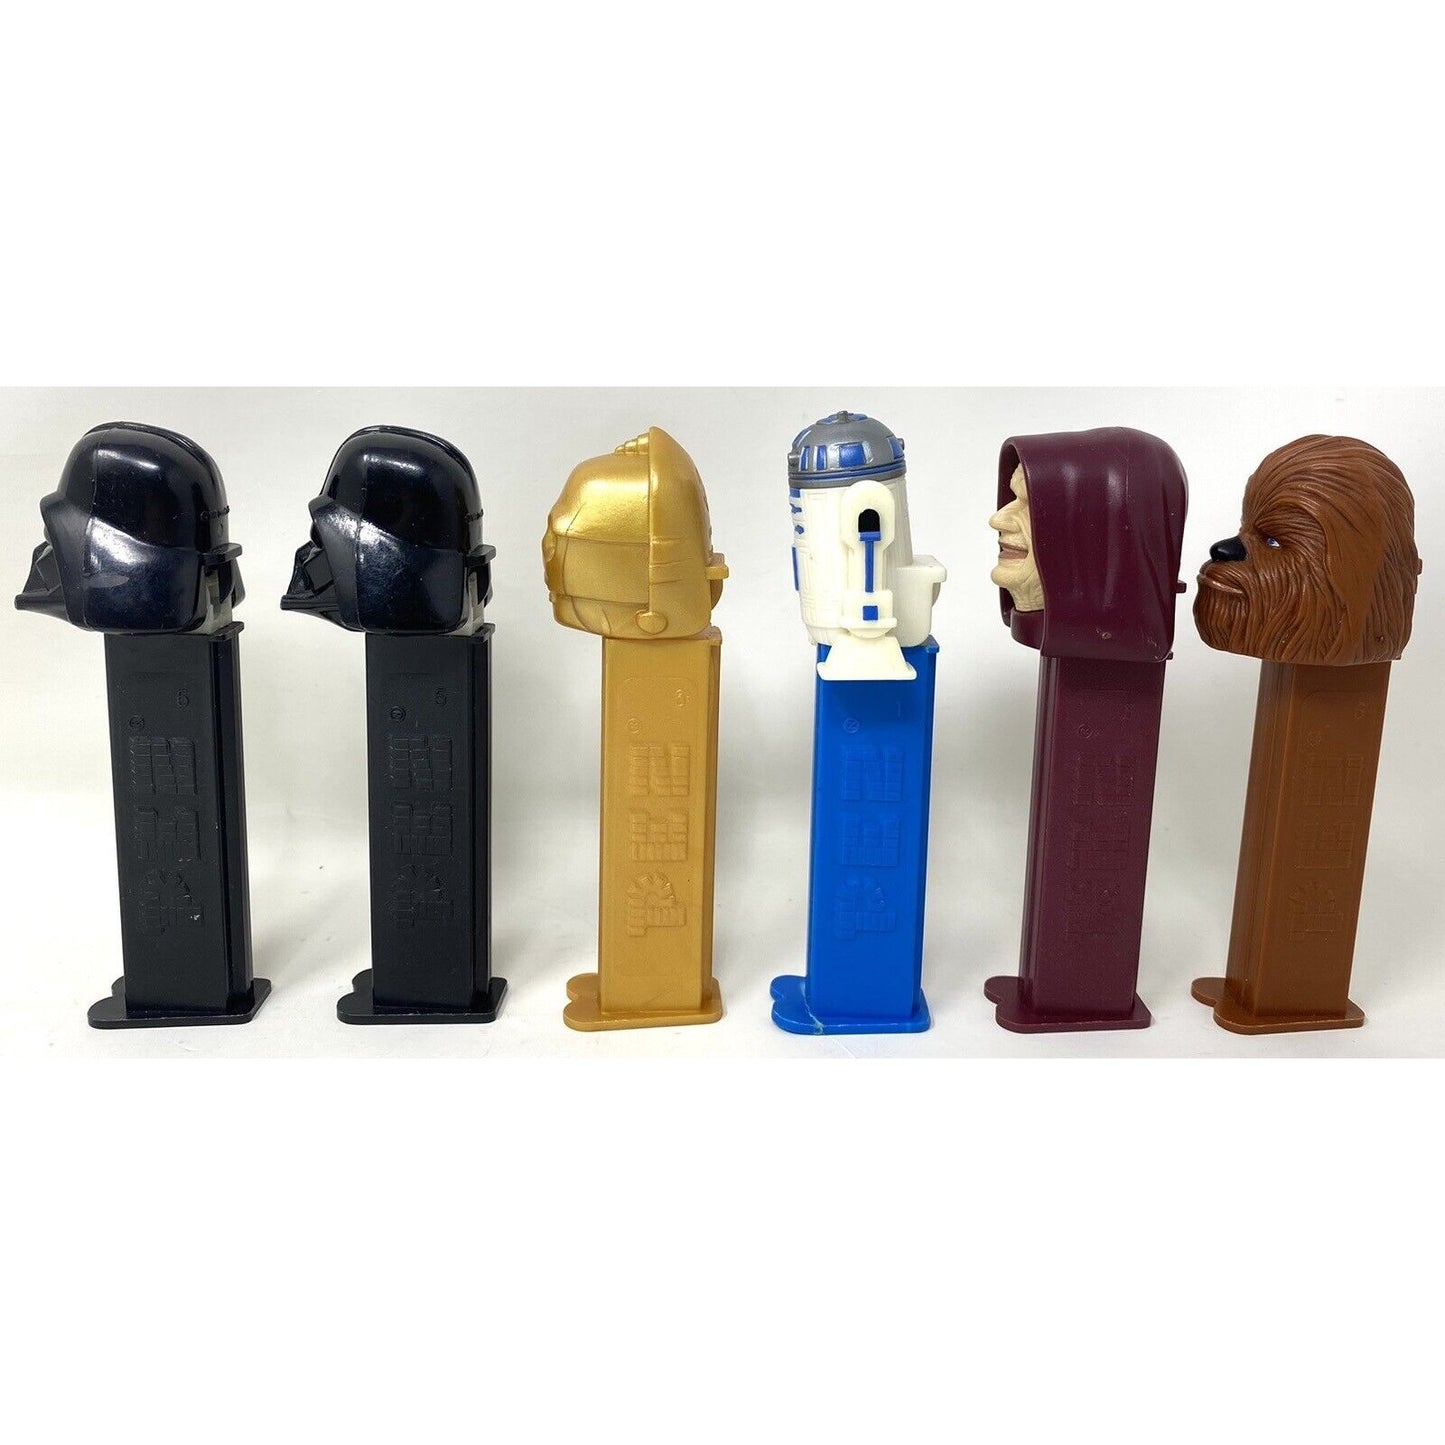 Lot of 9 Star Wars PEZ Candy Dispensers - Darth Vader C3PO Yoda R2D2 Chewbacca